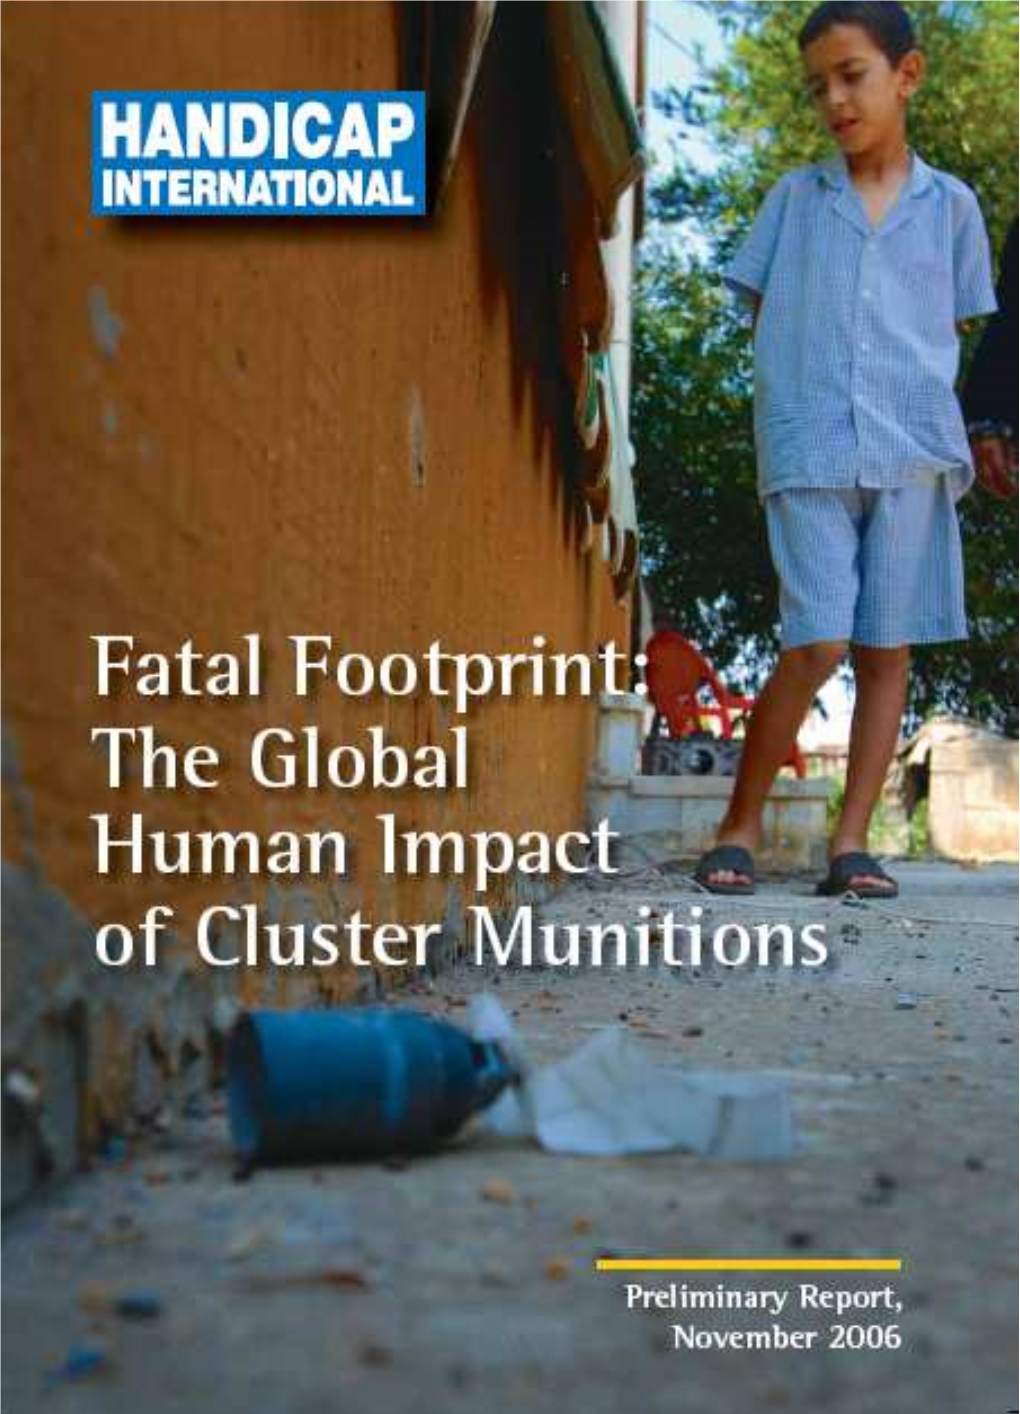 Fatal Footprint: the Global Human Impact of Cluster Munitions